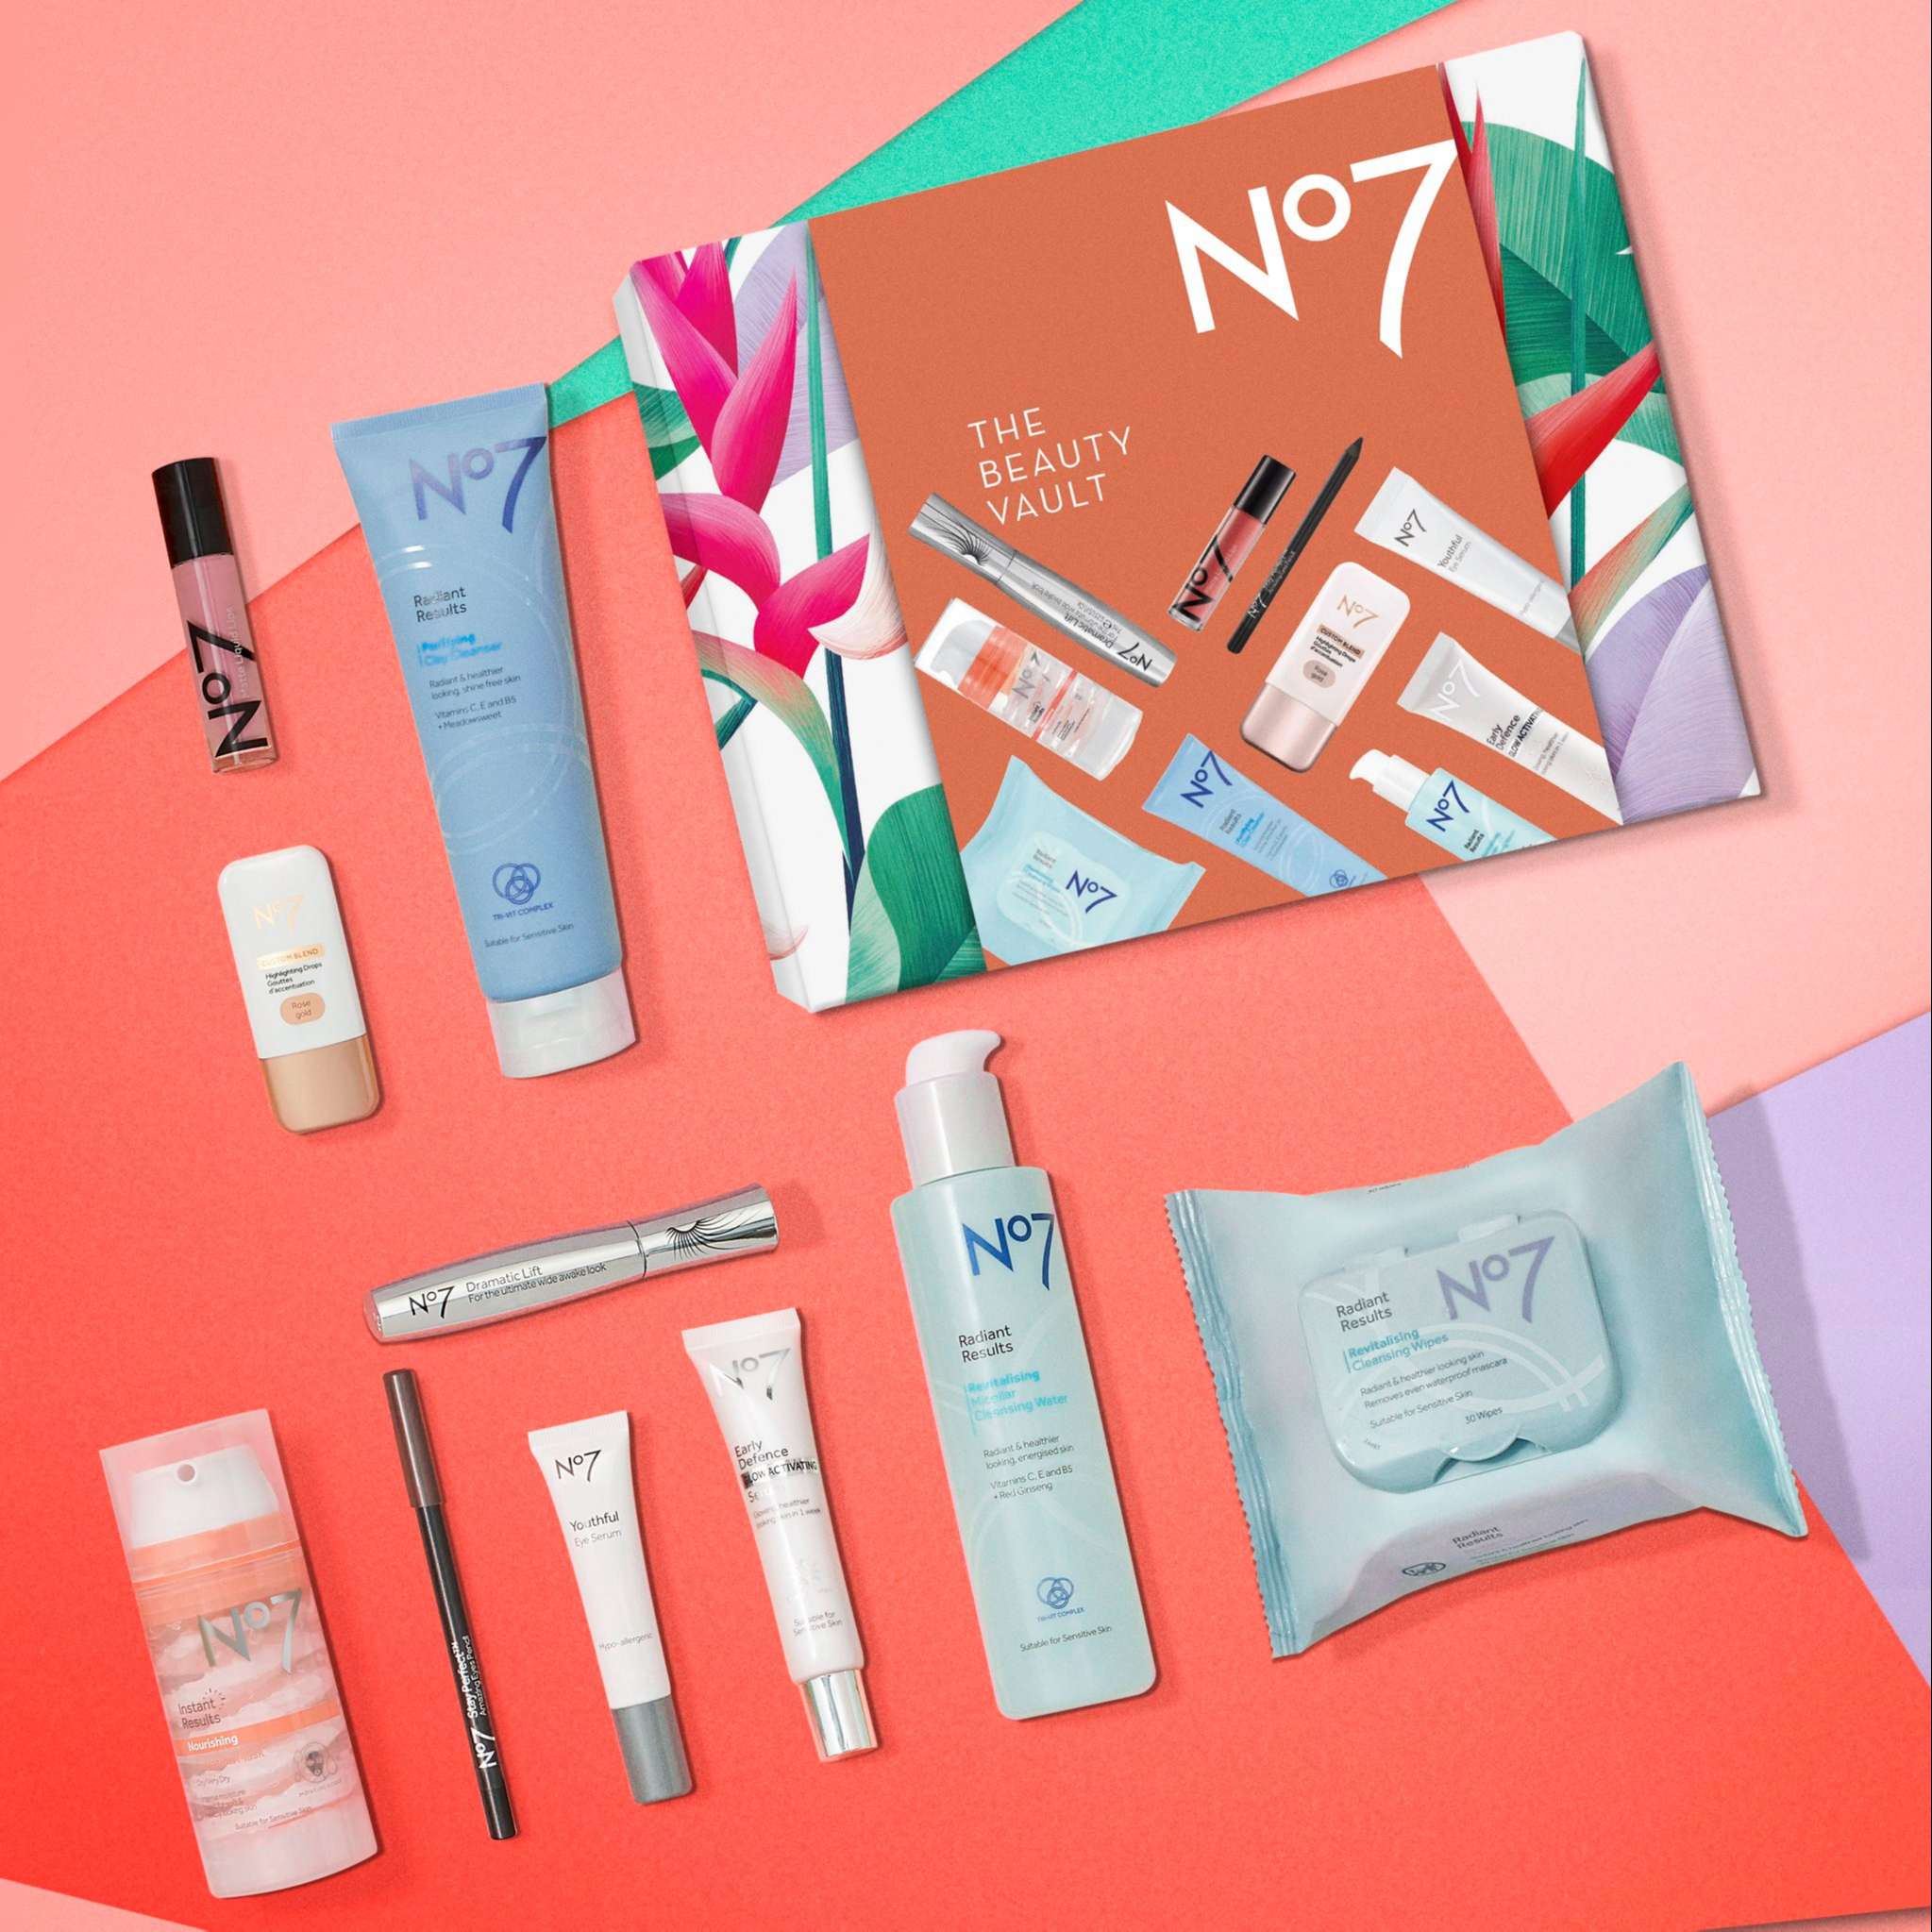 No7 Skin Care Review - Must Read This Before Buying